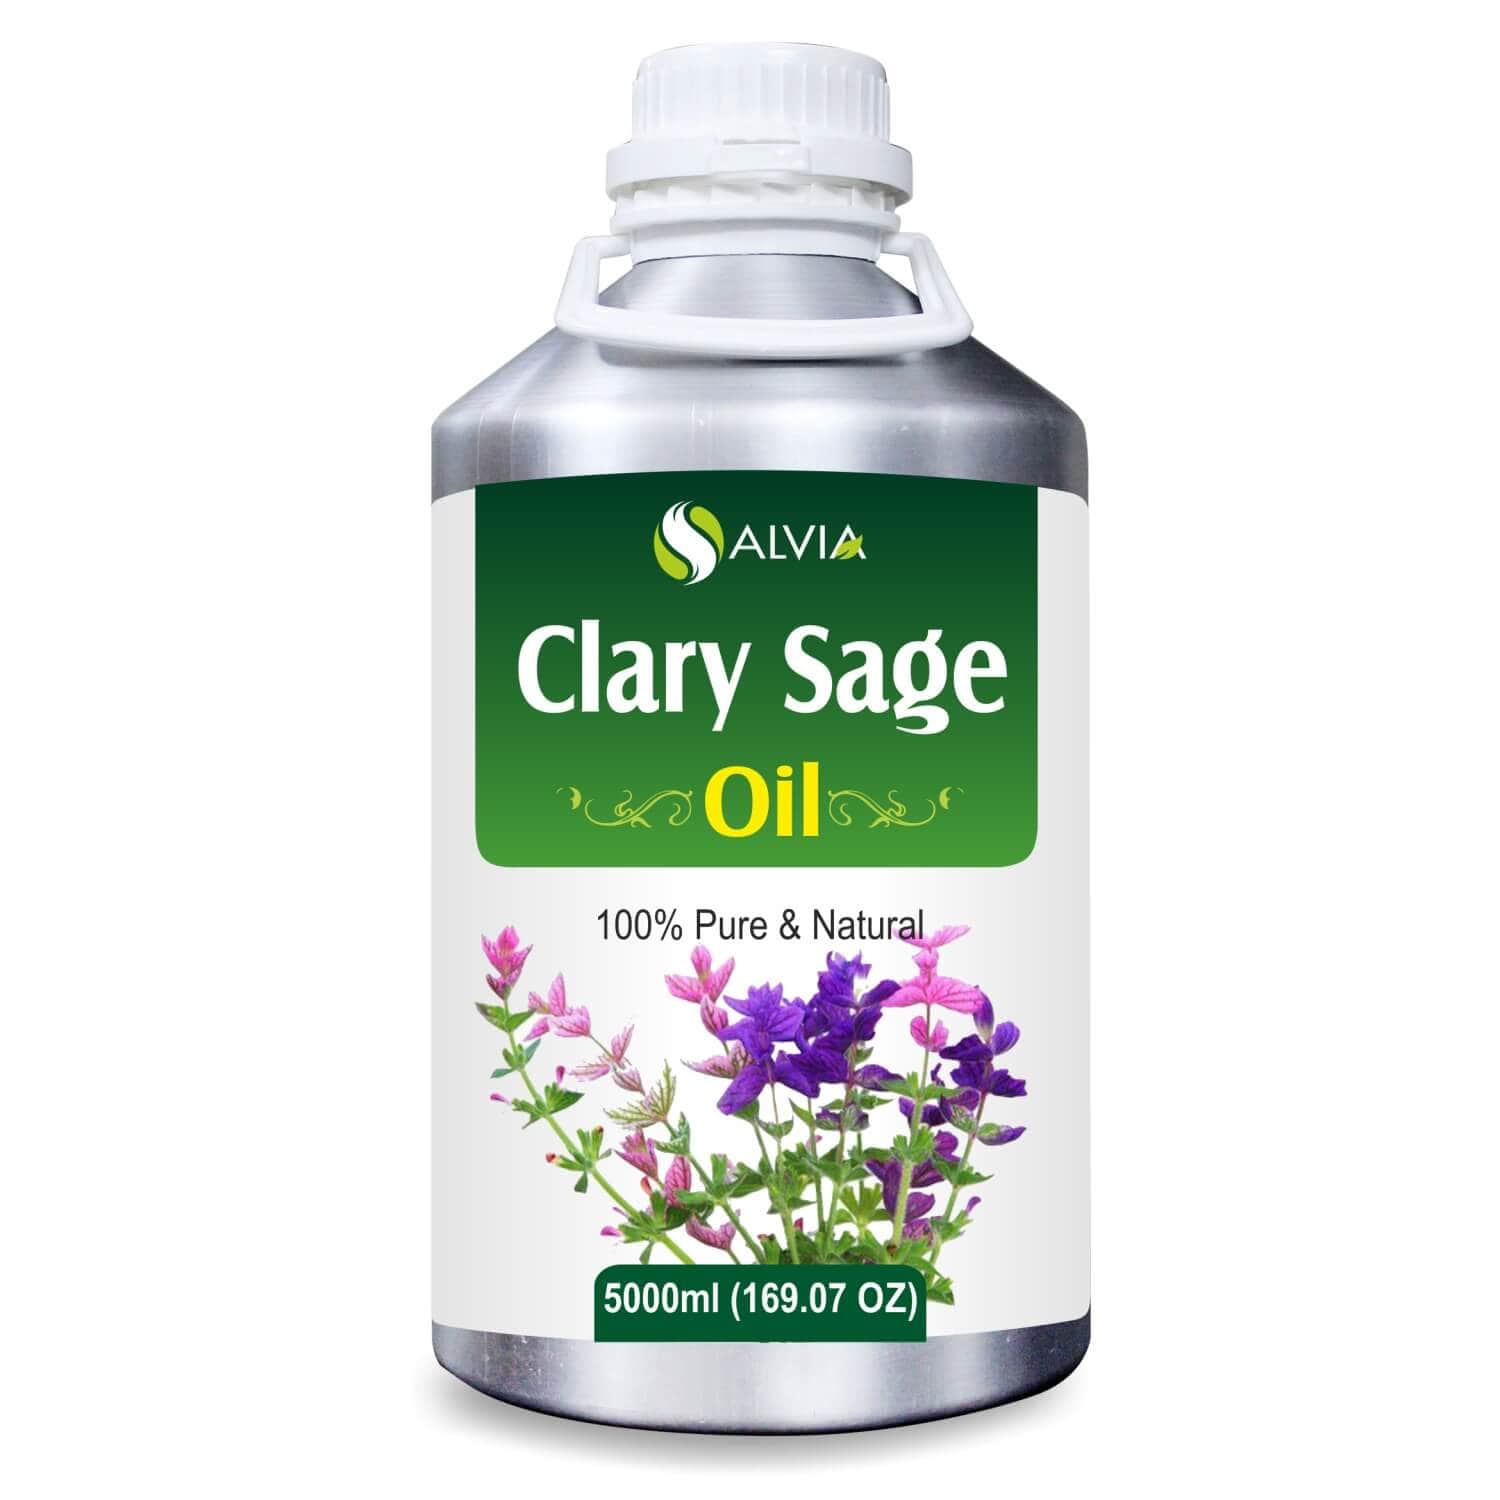 Salvia Natural Essential Oils,Greasy Oil,Acne,Anti-acne Oil,Oil for Greasy hair,Best Essential Oils for Hair 5000ml Clary Sage Oil (Salvia sclarea) 100% Natural Pure Essential Oil Alleviates Stress, Gives Relaxation,  Promotes Hair Growth, Calms Skin Rashes